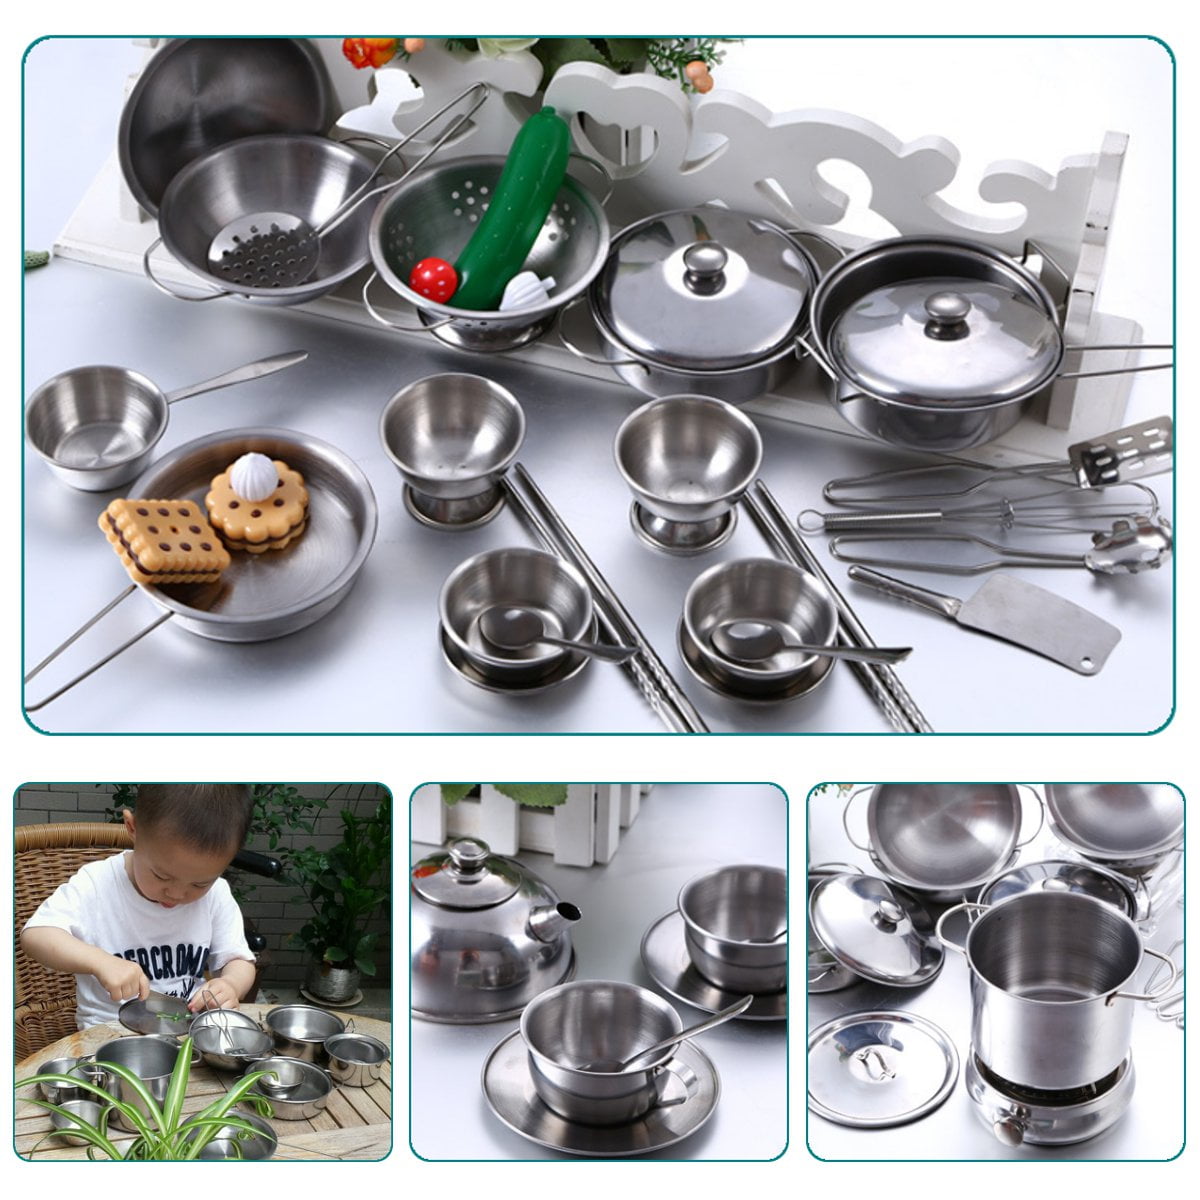 25pcs Kids Pretend Food Play Kitchen Toys Cooking Set Stainless Steel Pots And Pans Cookware Playset Development Learning Tool Walmart Com Walmart Com,Nine Patch Quilt Patterns Free